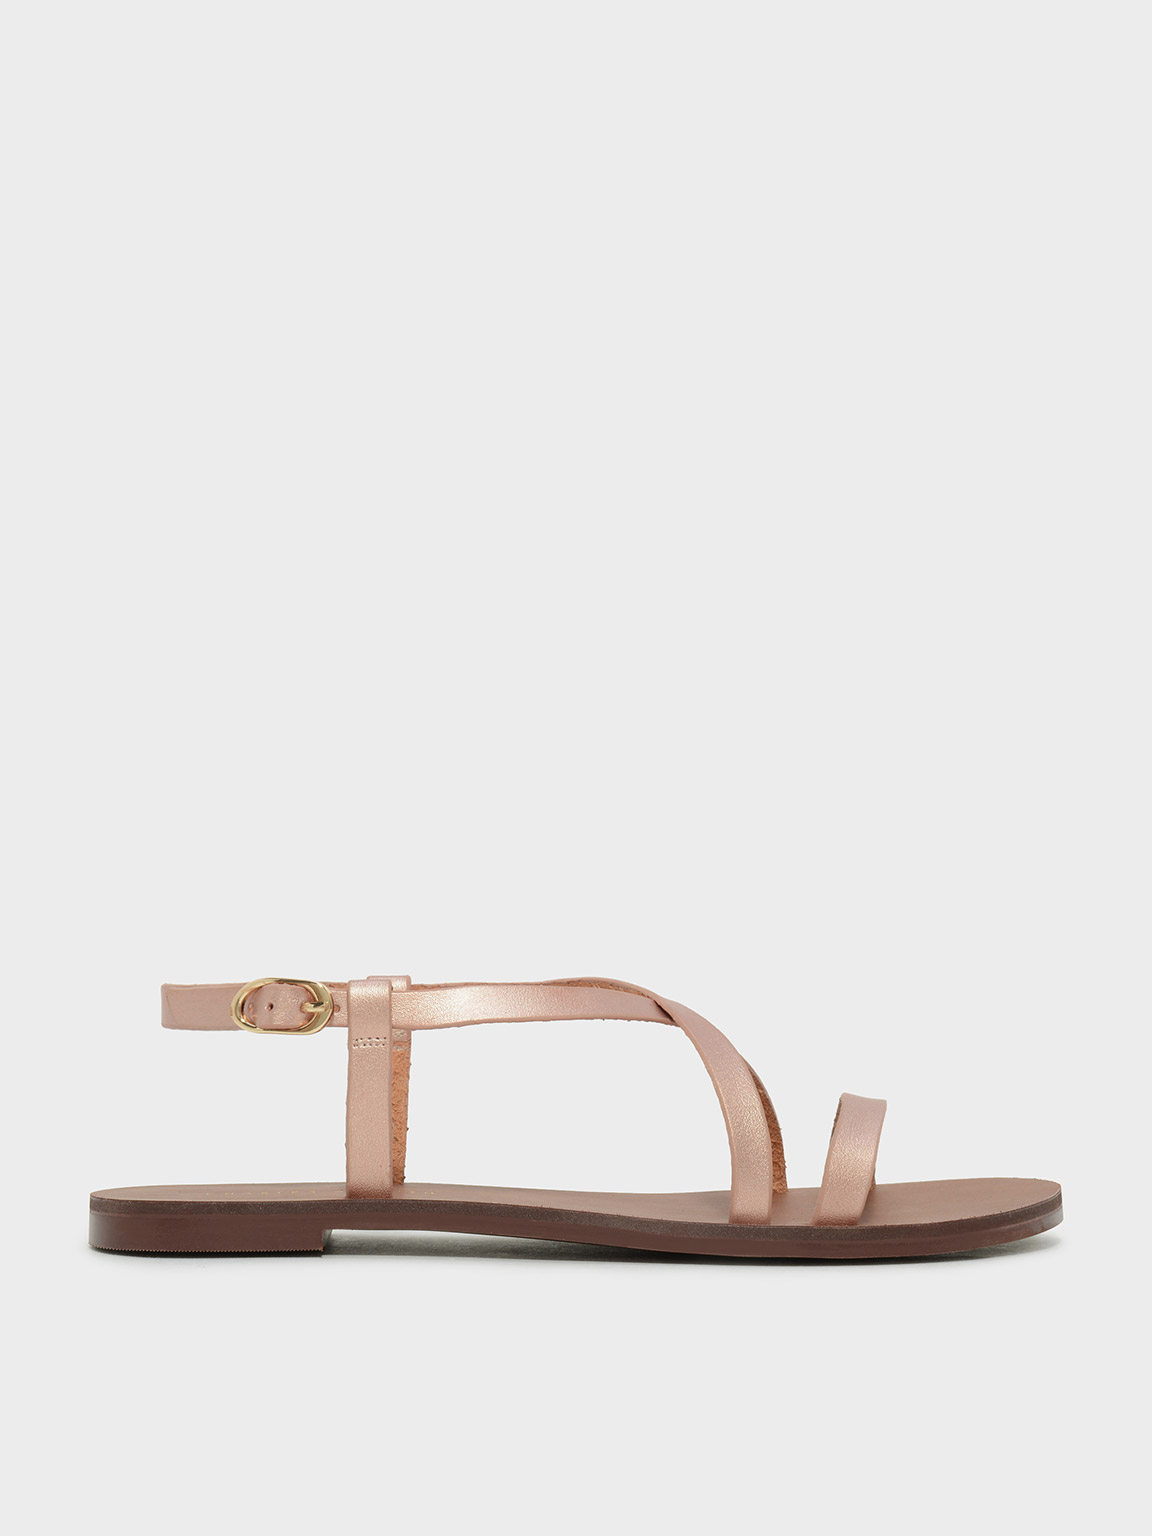 Rose Gold Criss Cross Sandals - CHARLES & KEITH SG